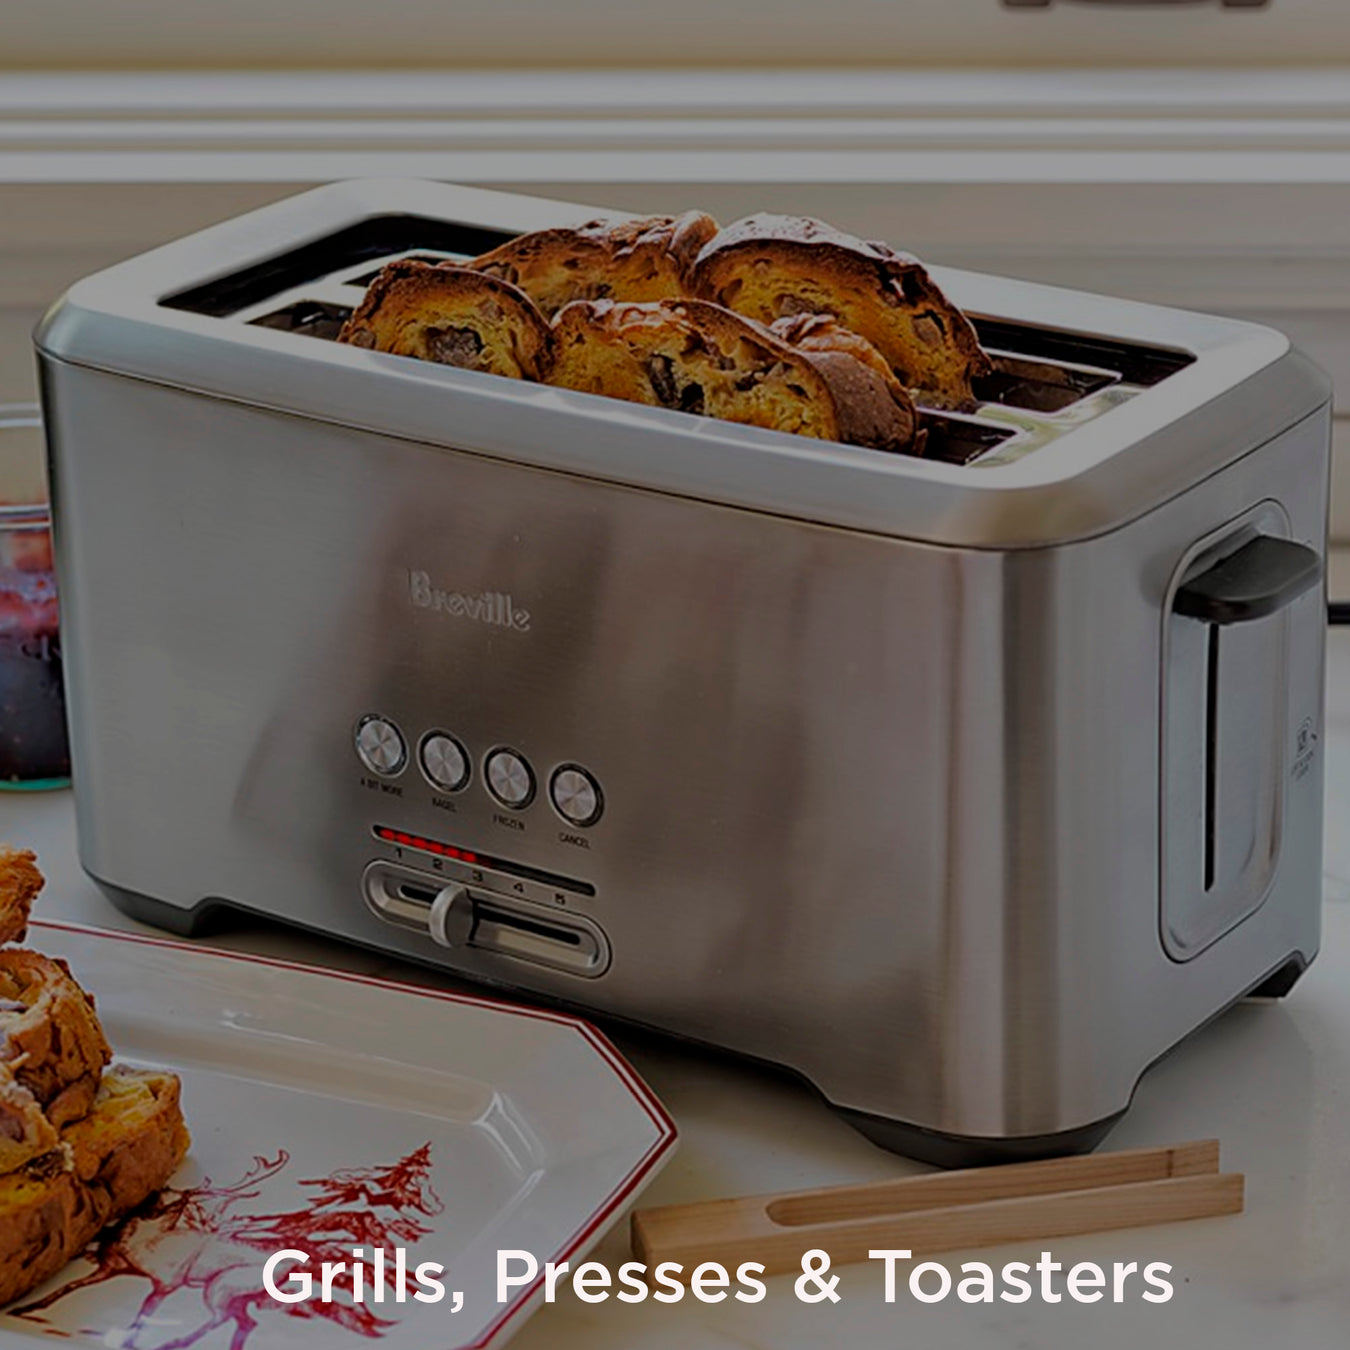 Breville Grills, Presses & Toasters